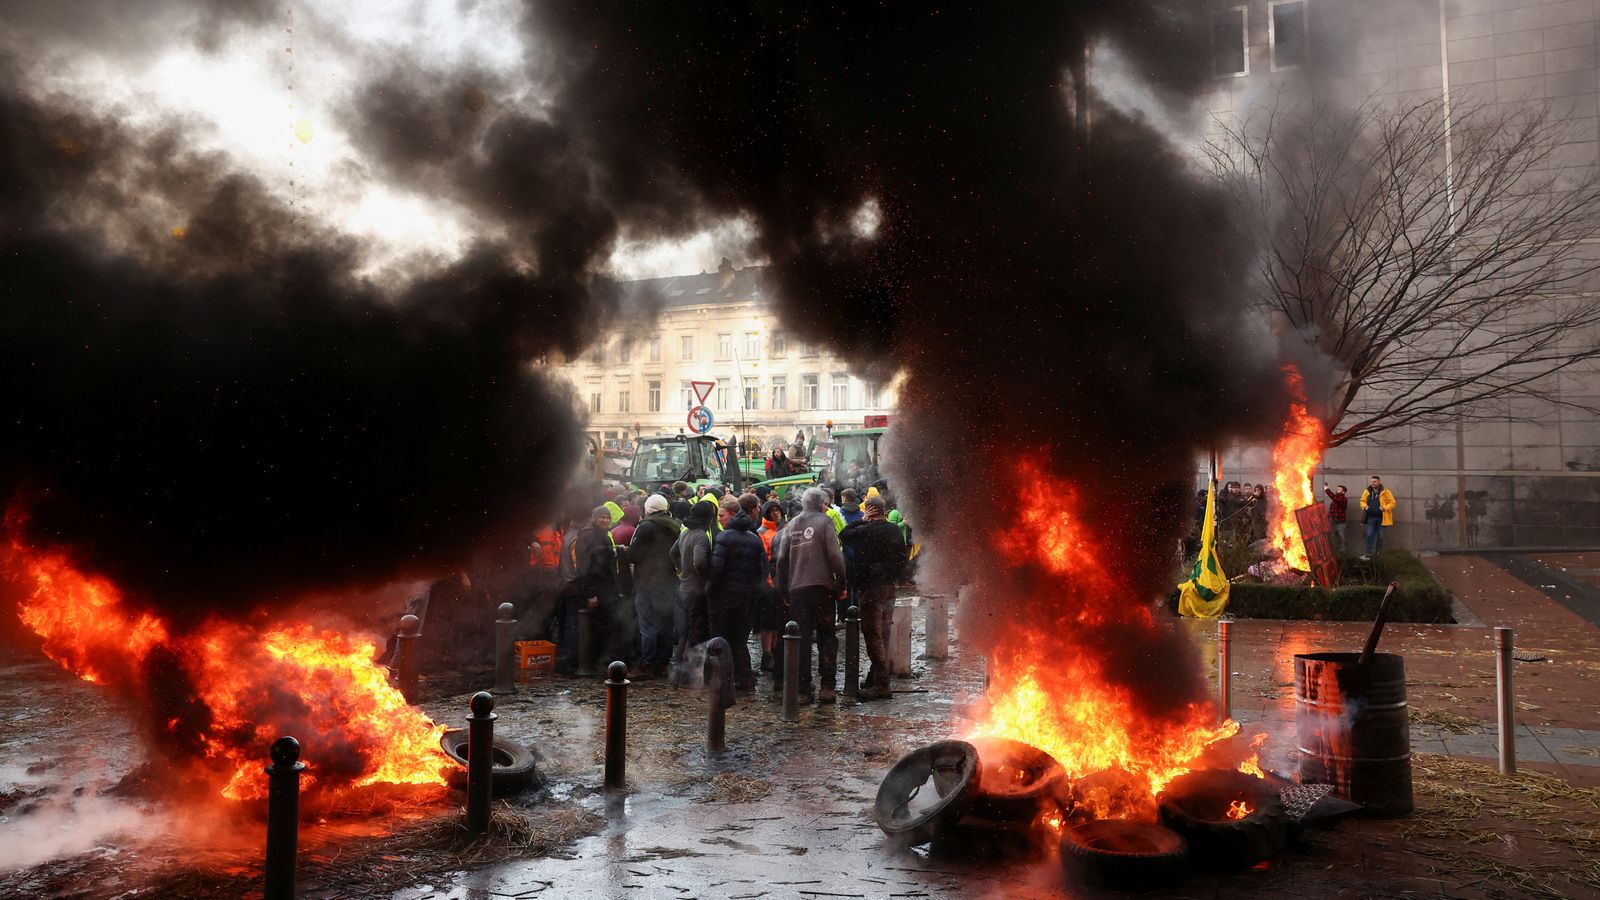 Fires erupt as farmers protest outside European Parliament in Brussels